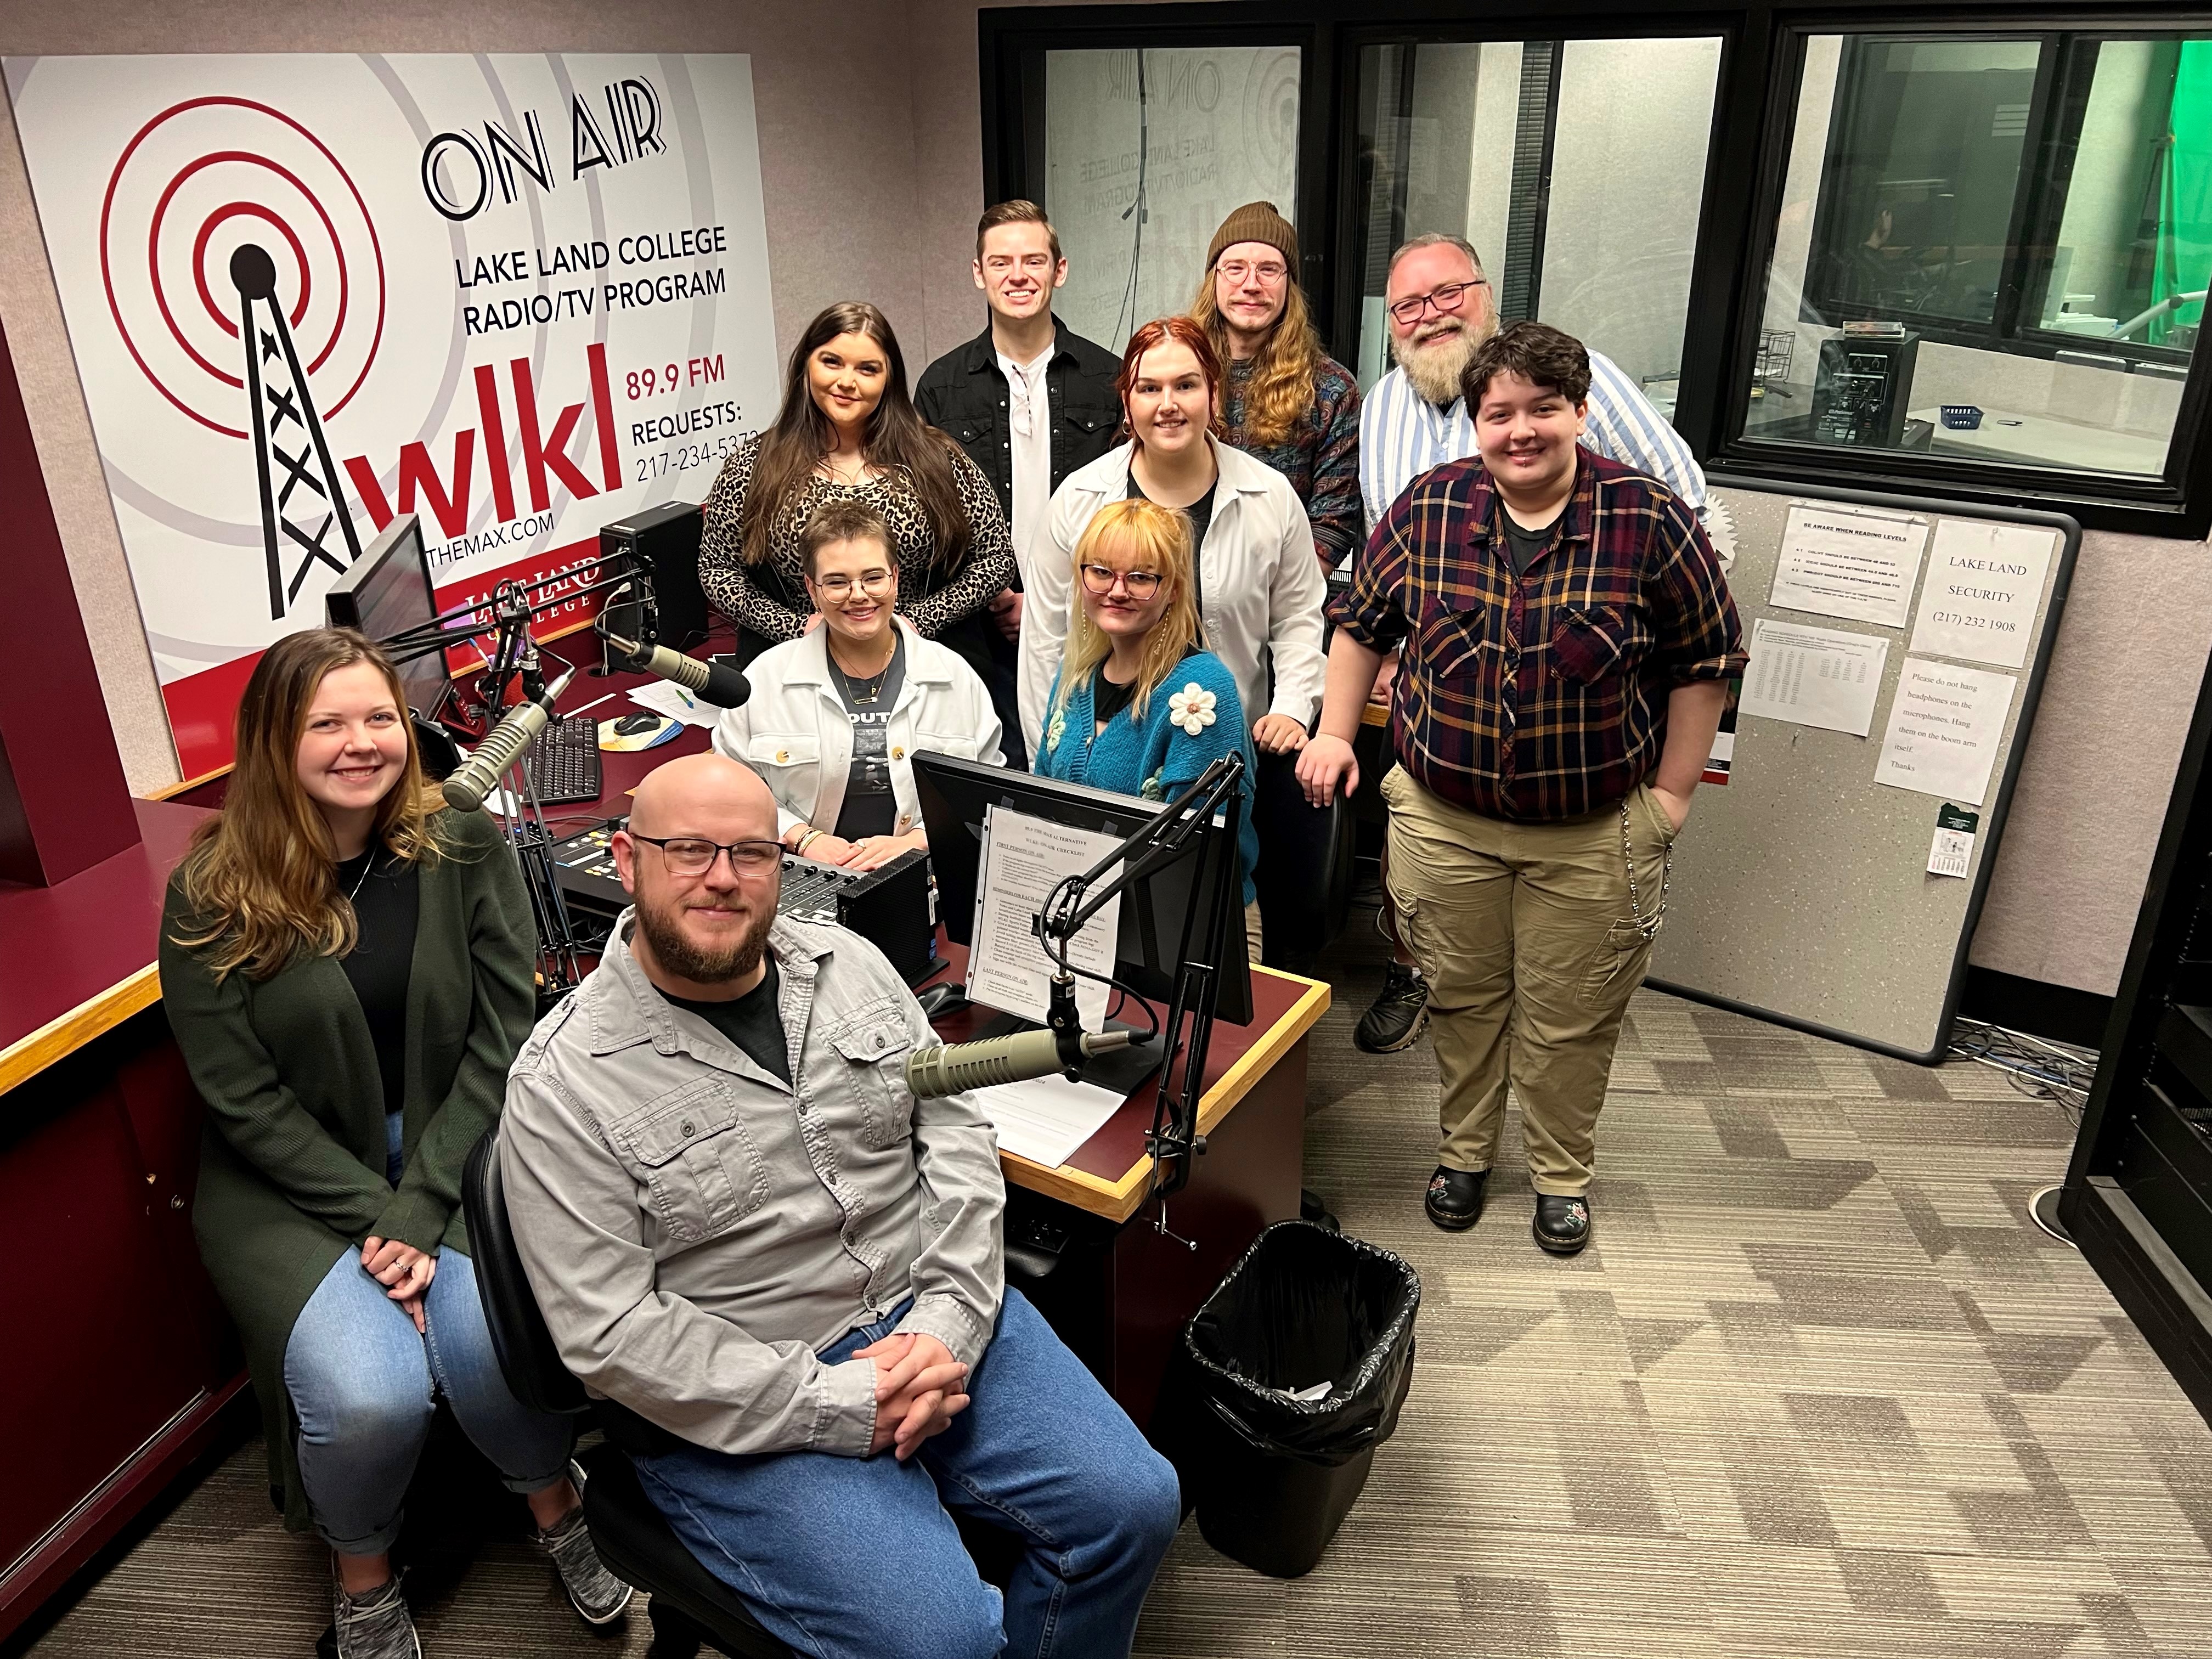 Ten Lake Land Students gathered in the WLKL Broadcast Studio